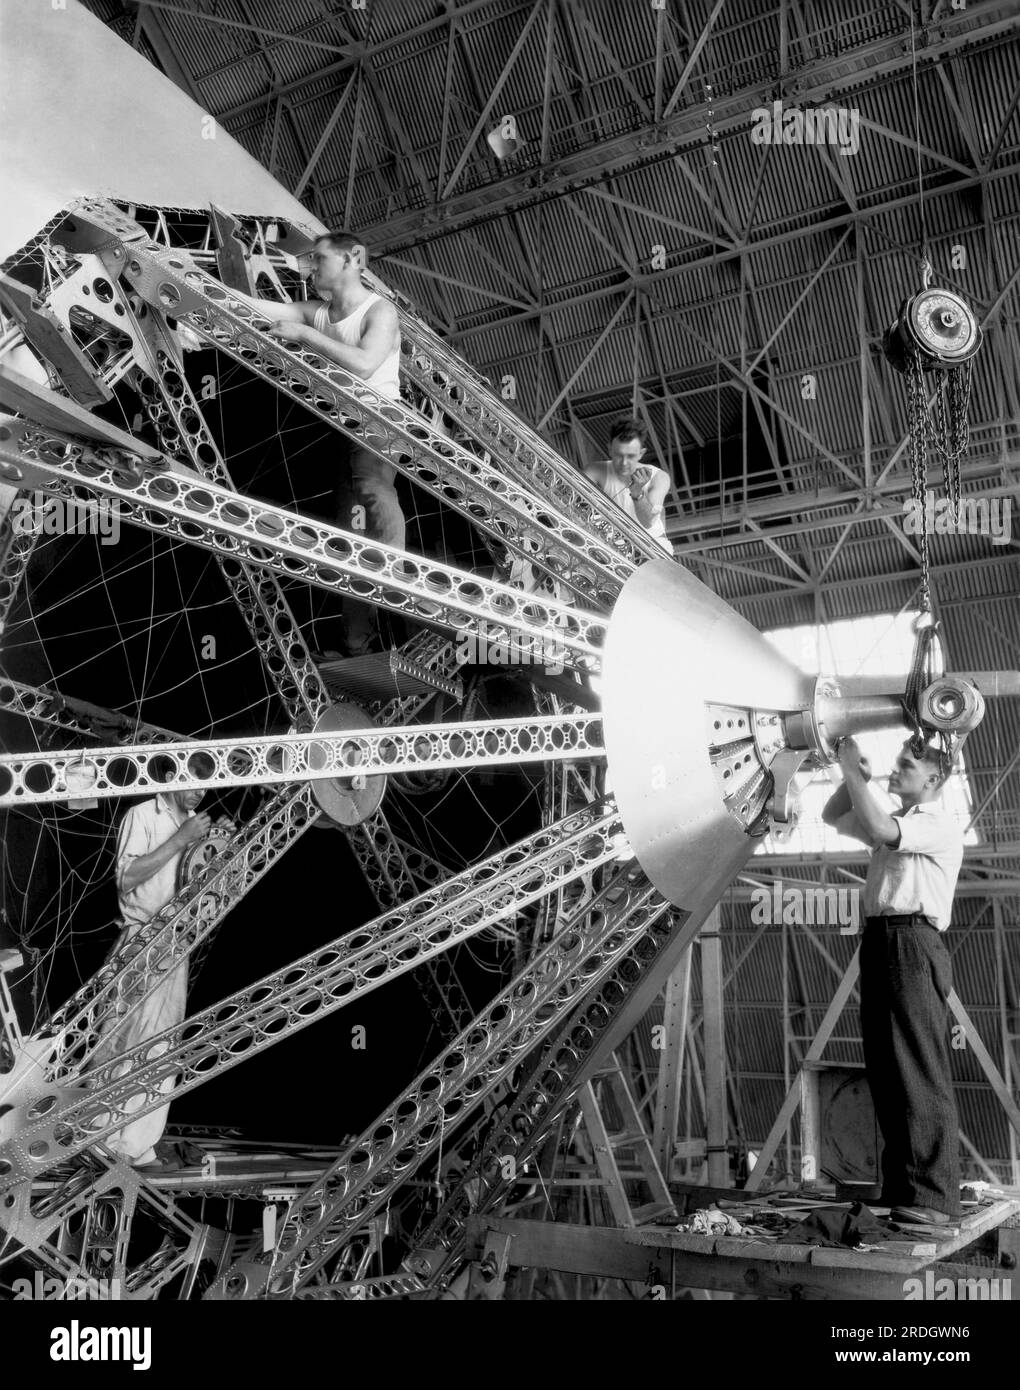 Akron, Ohio:  c. 1930 Workmen in the Goodyear Rubber Plant putting the finishing touches on the U.S. Navy Dirigible, 'Akron'. It was a helium filled airship, and crashed in a severe storm into the Atlantic Ocean on April 3, 1933. Stock Photo